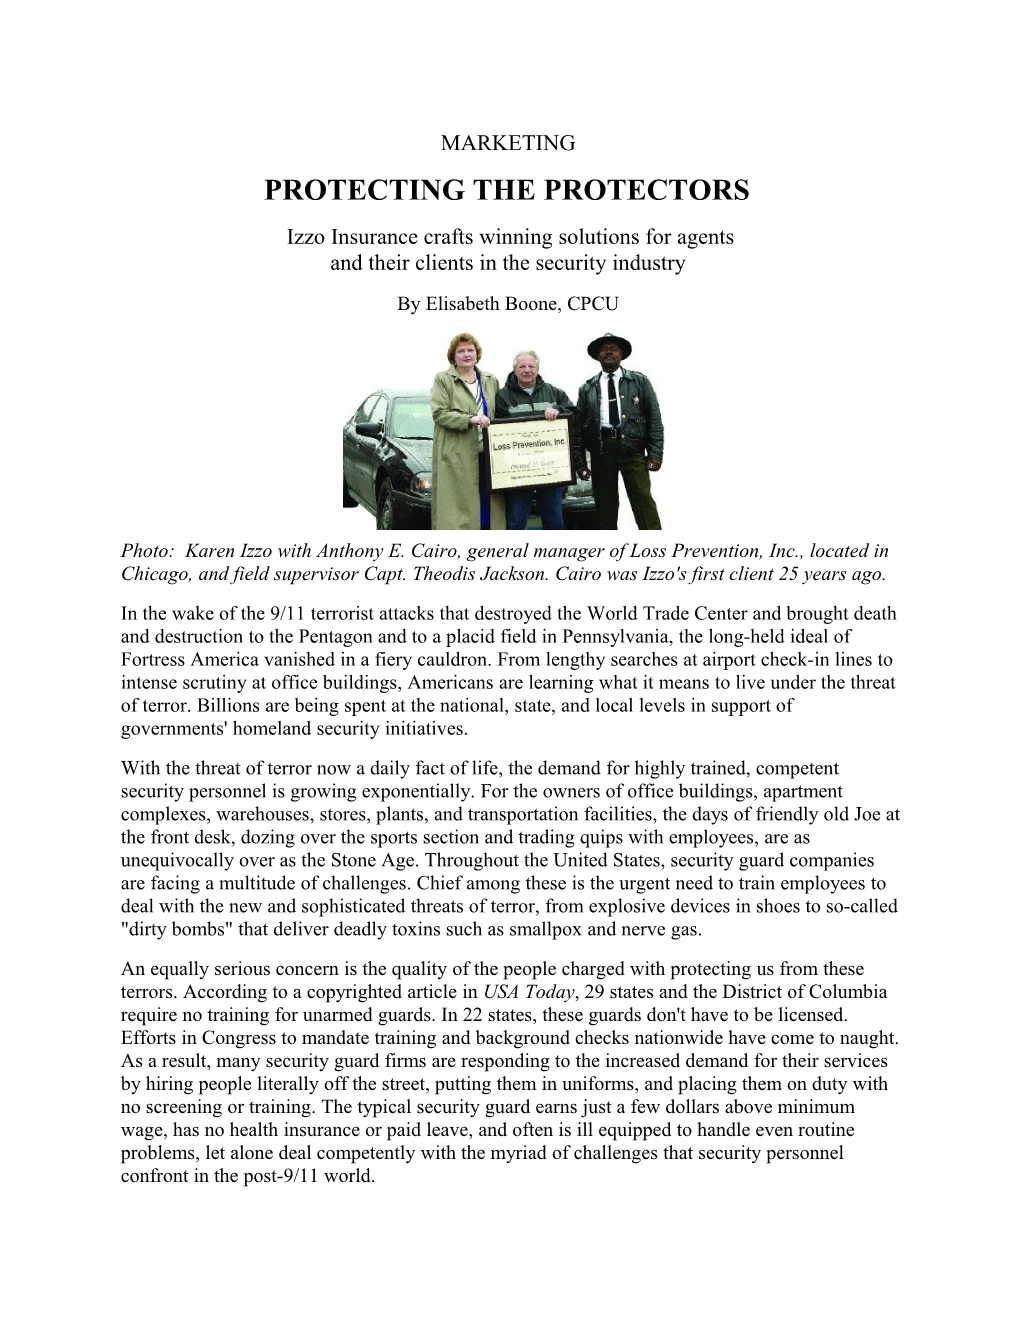 Protecting the Protectors